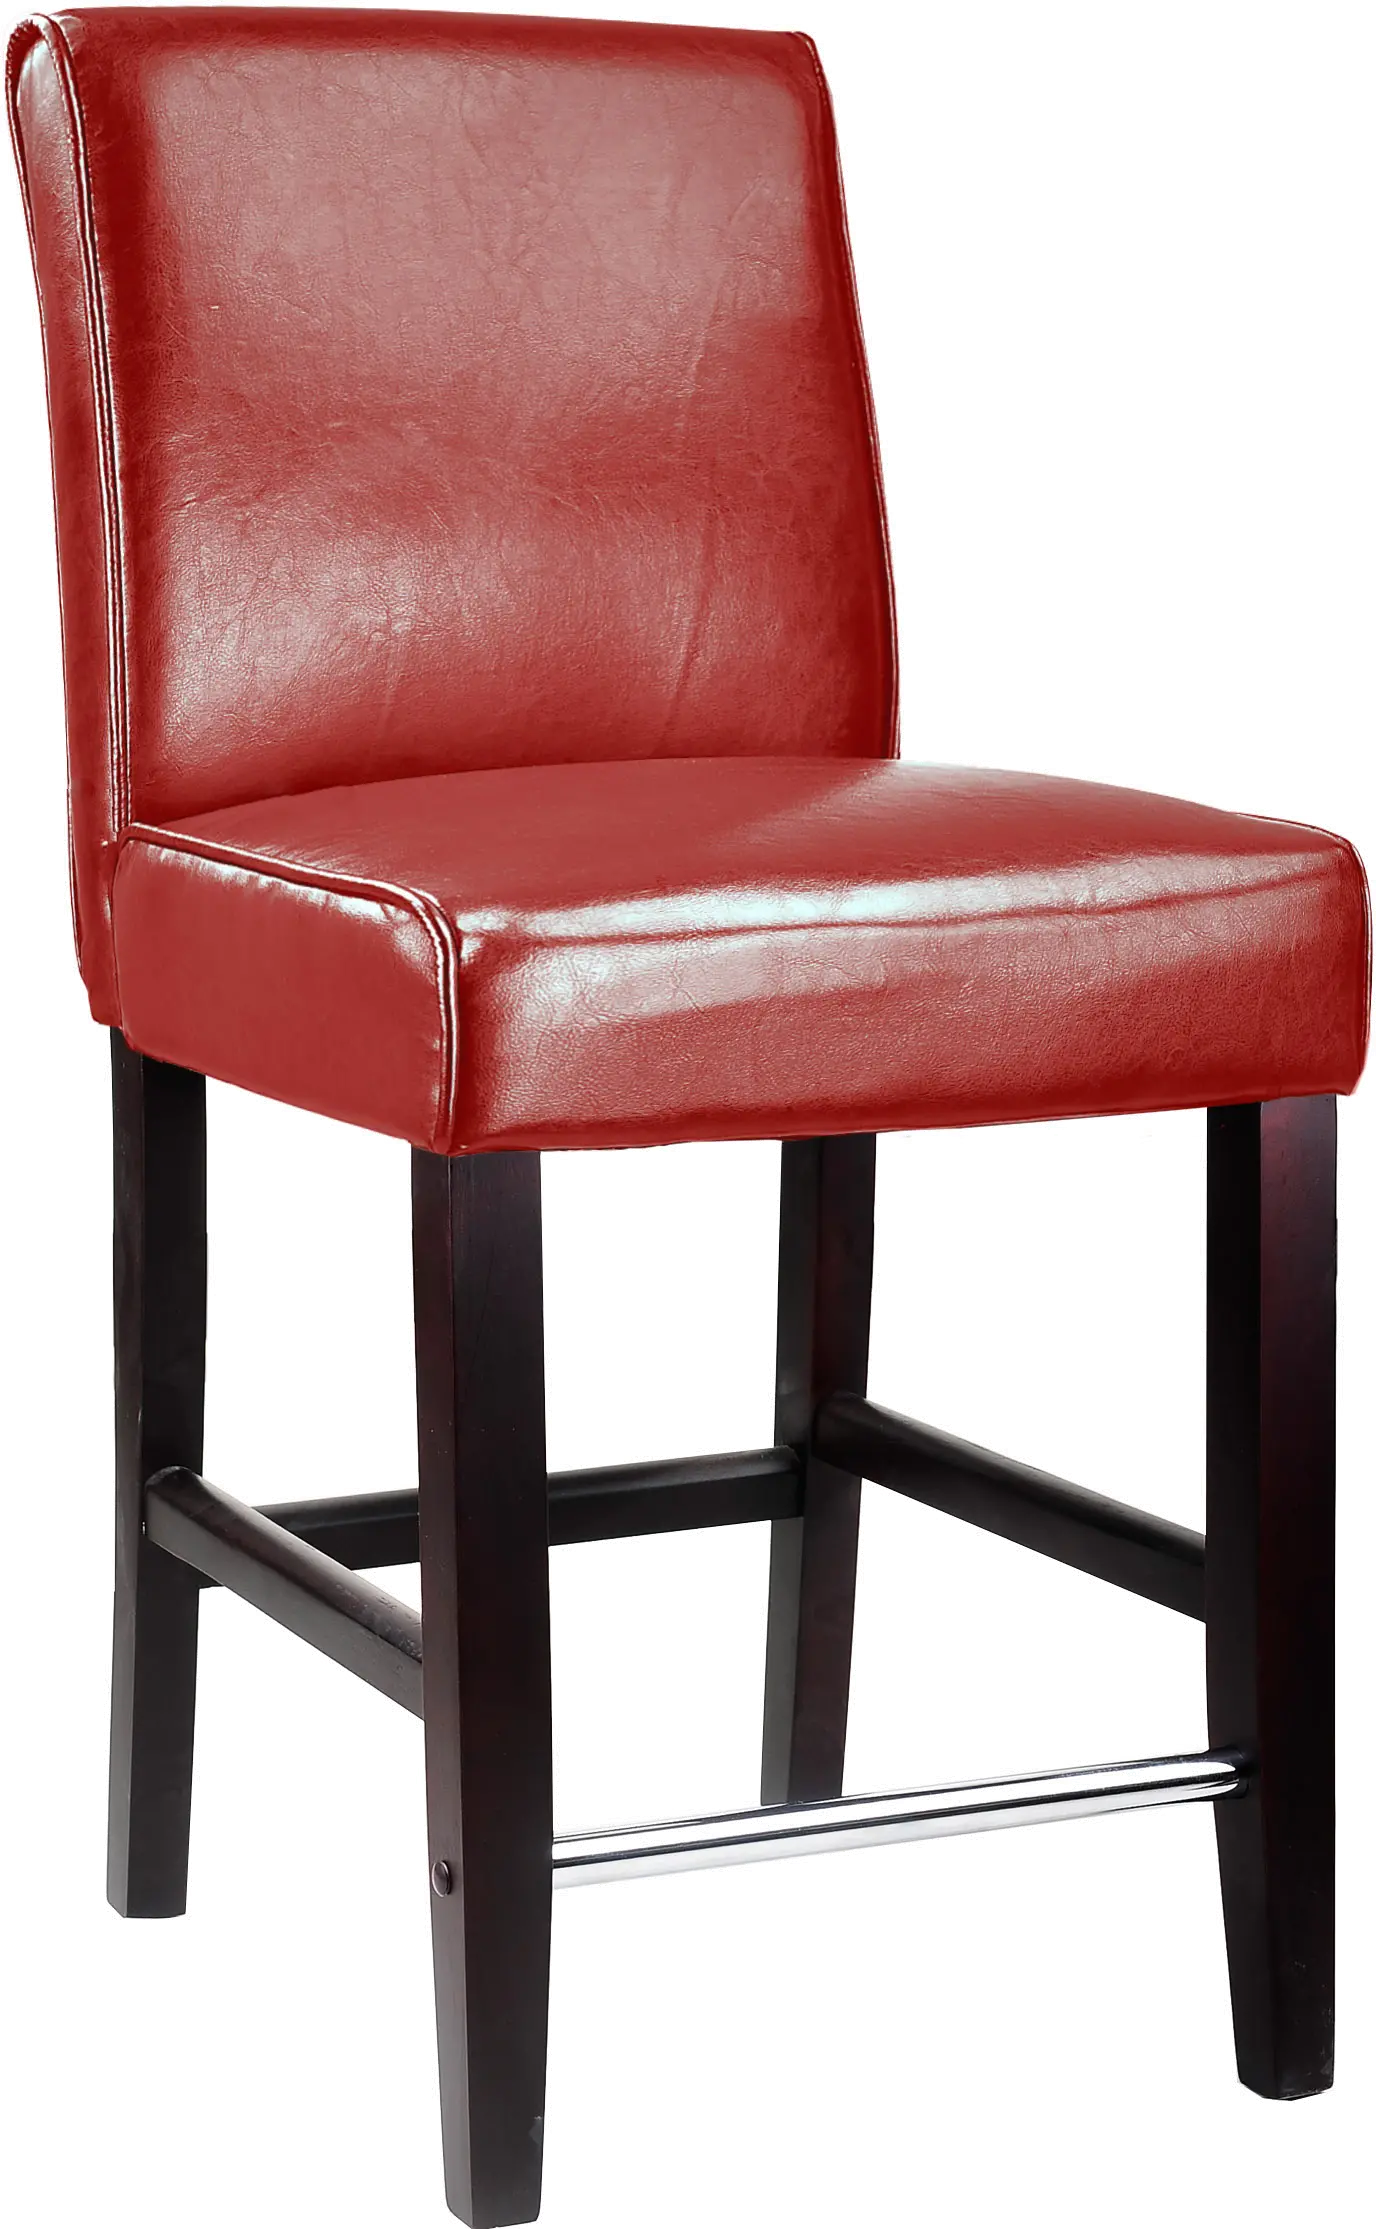 Photos - Chair CorLiving Antonio Red Upholstered Counter Height Stool DAD-554-B 